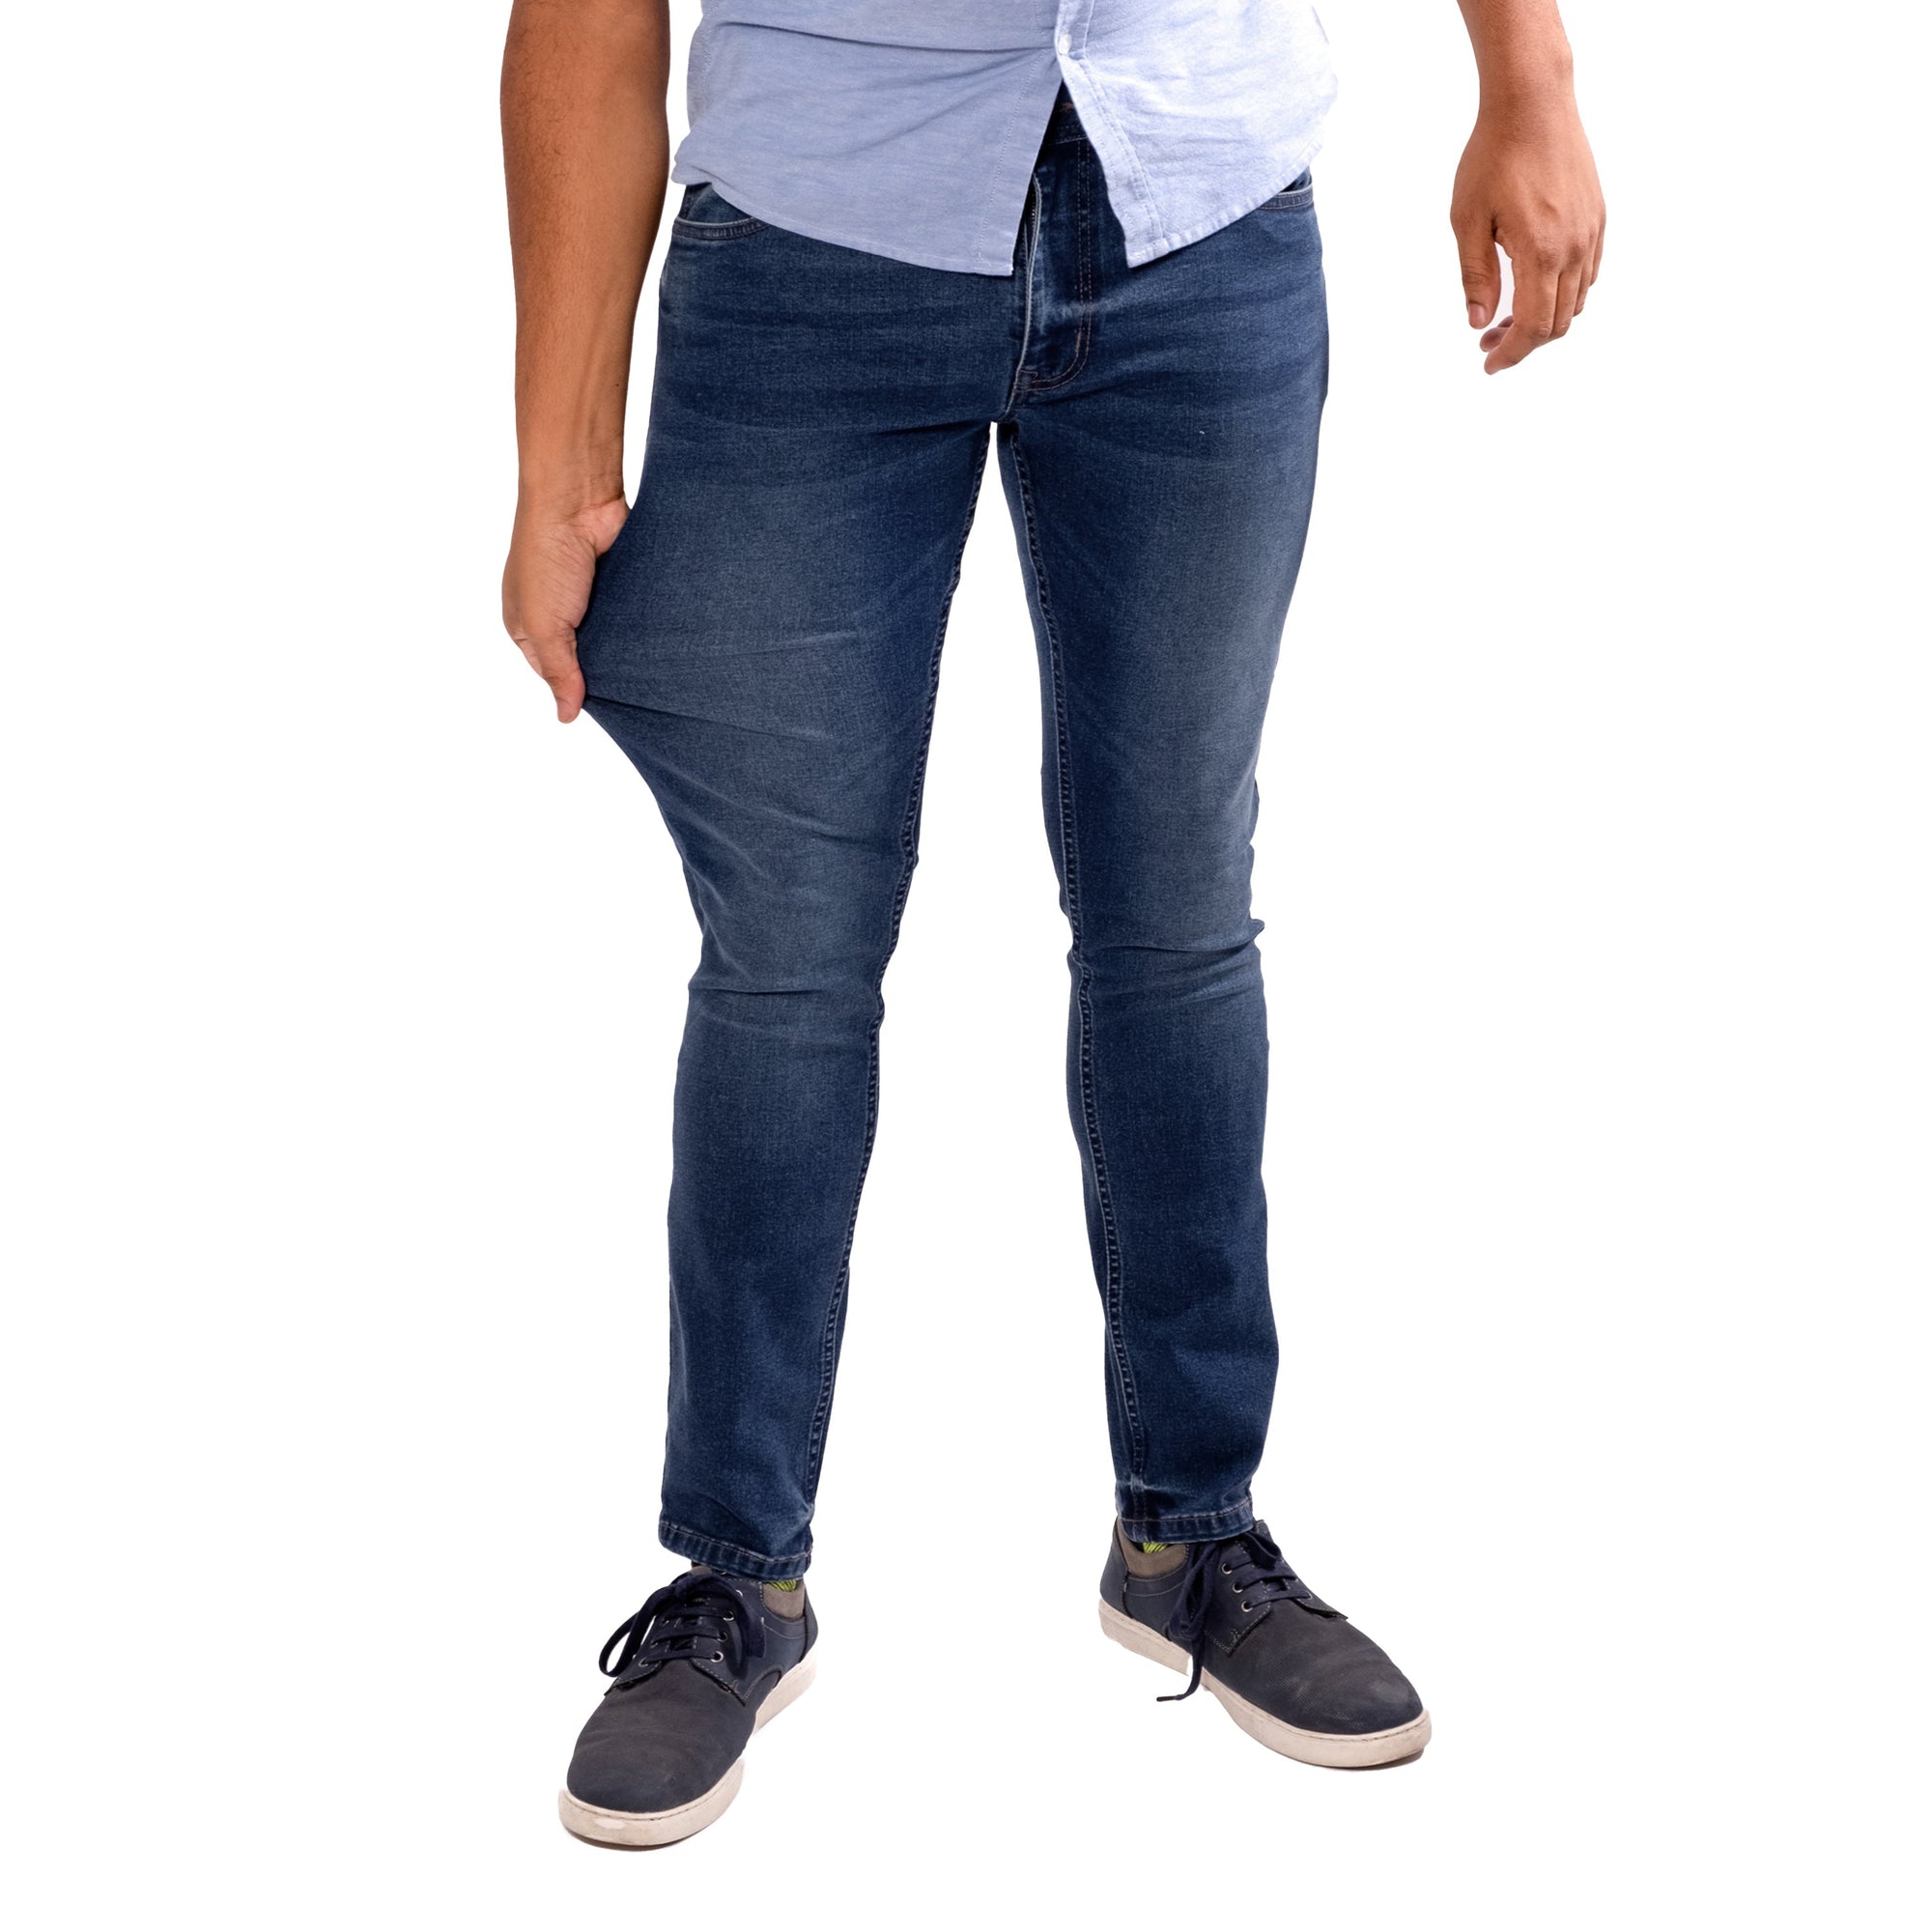 Skinny Fit / Admiral Perfect Jeans The Jean | - Medium Blue